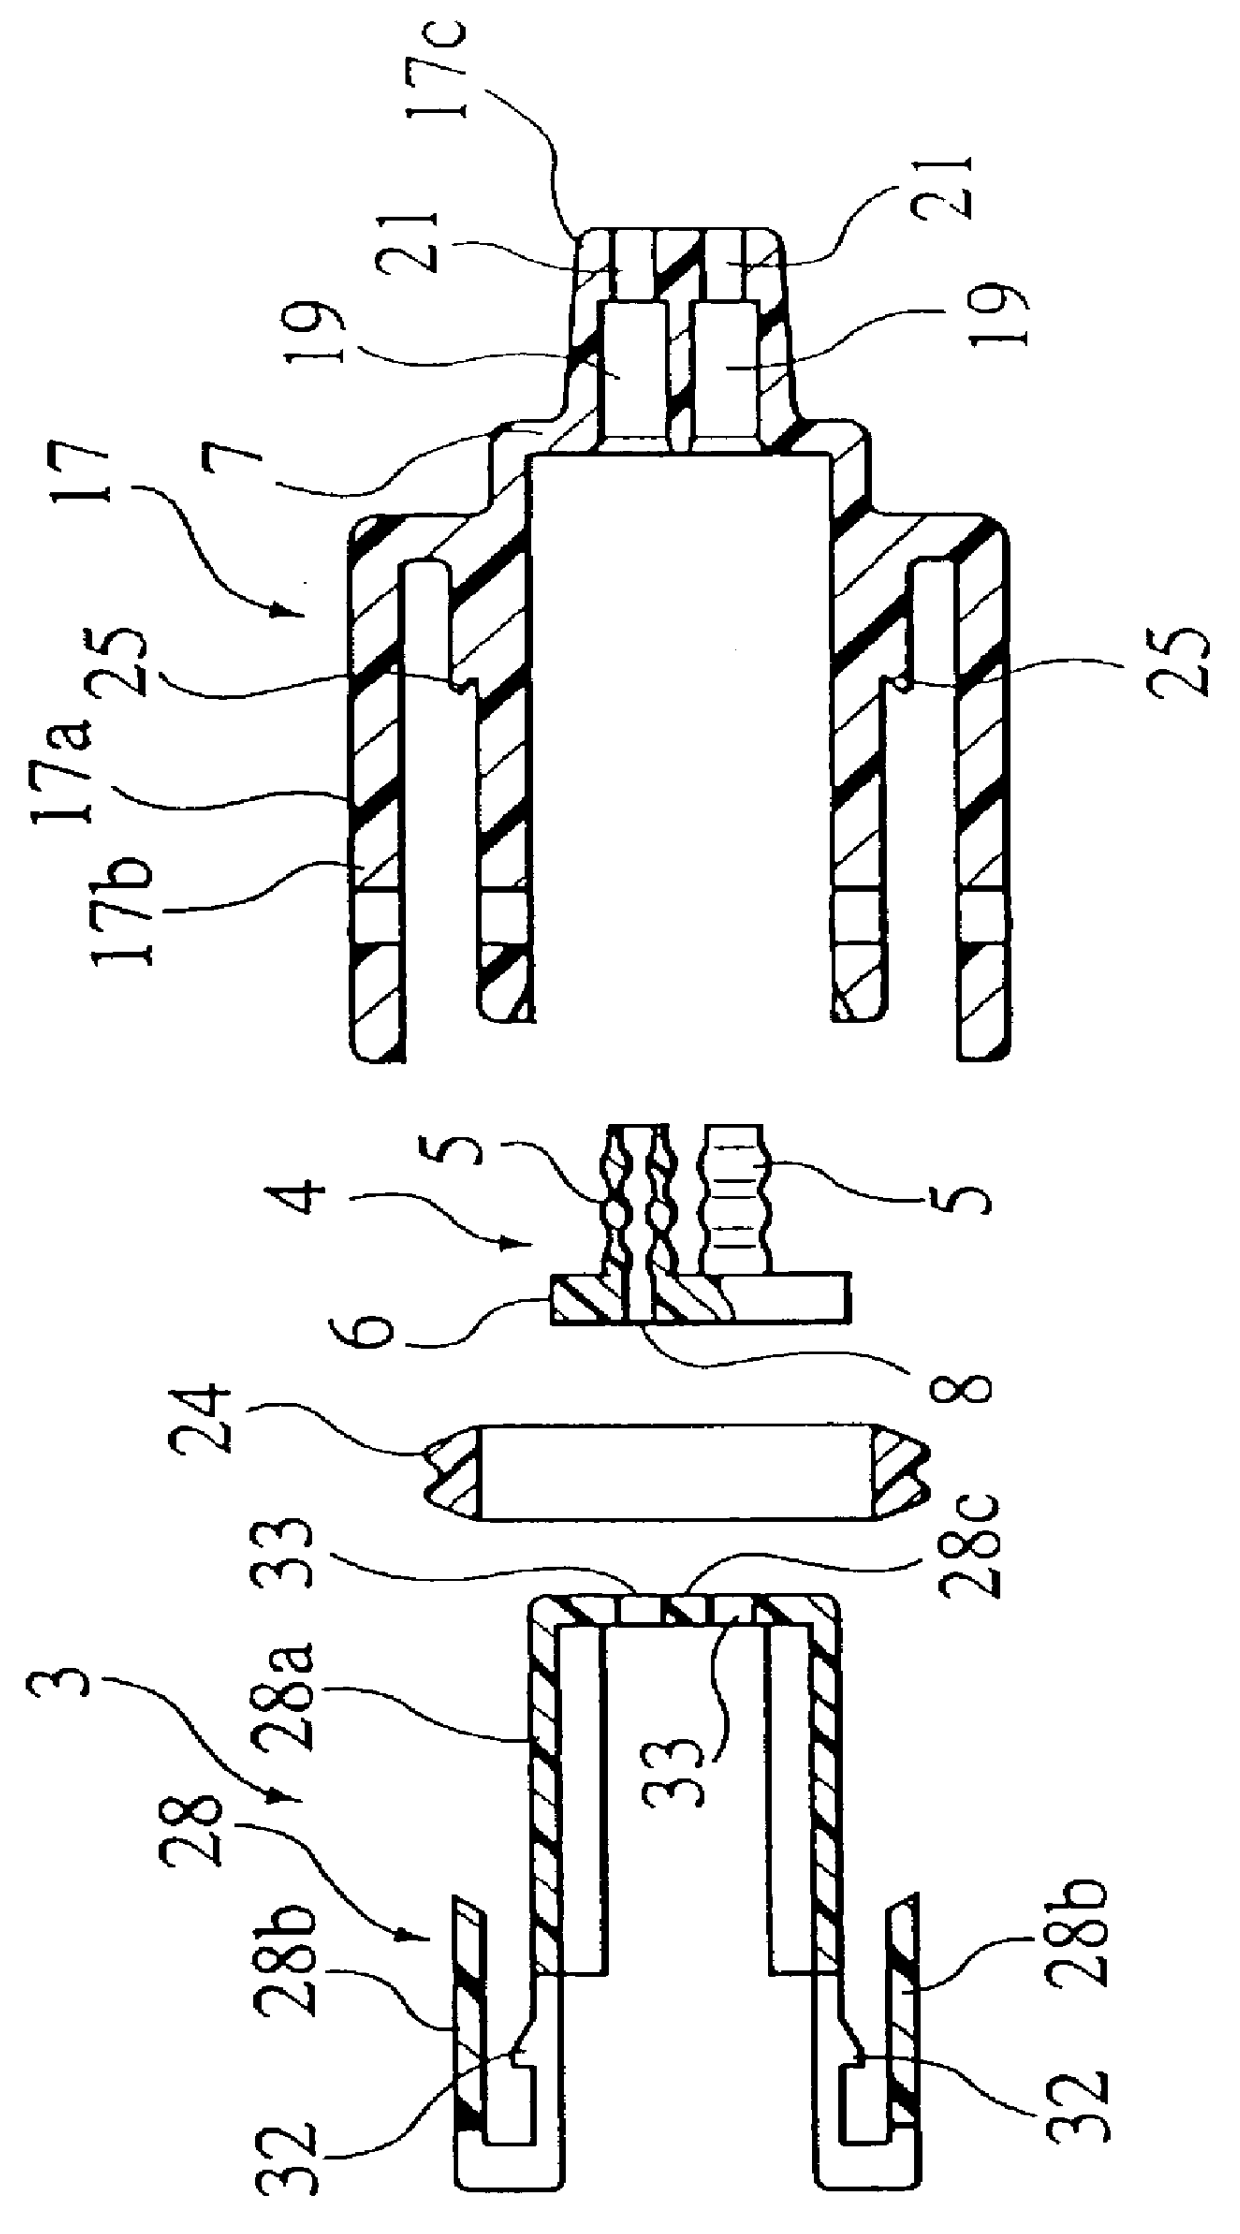 Waterproof connector and method for assembling same